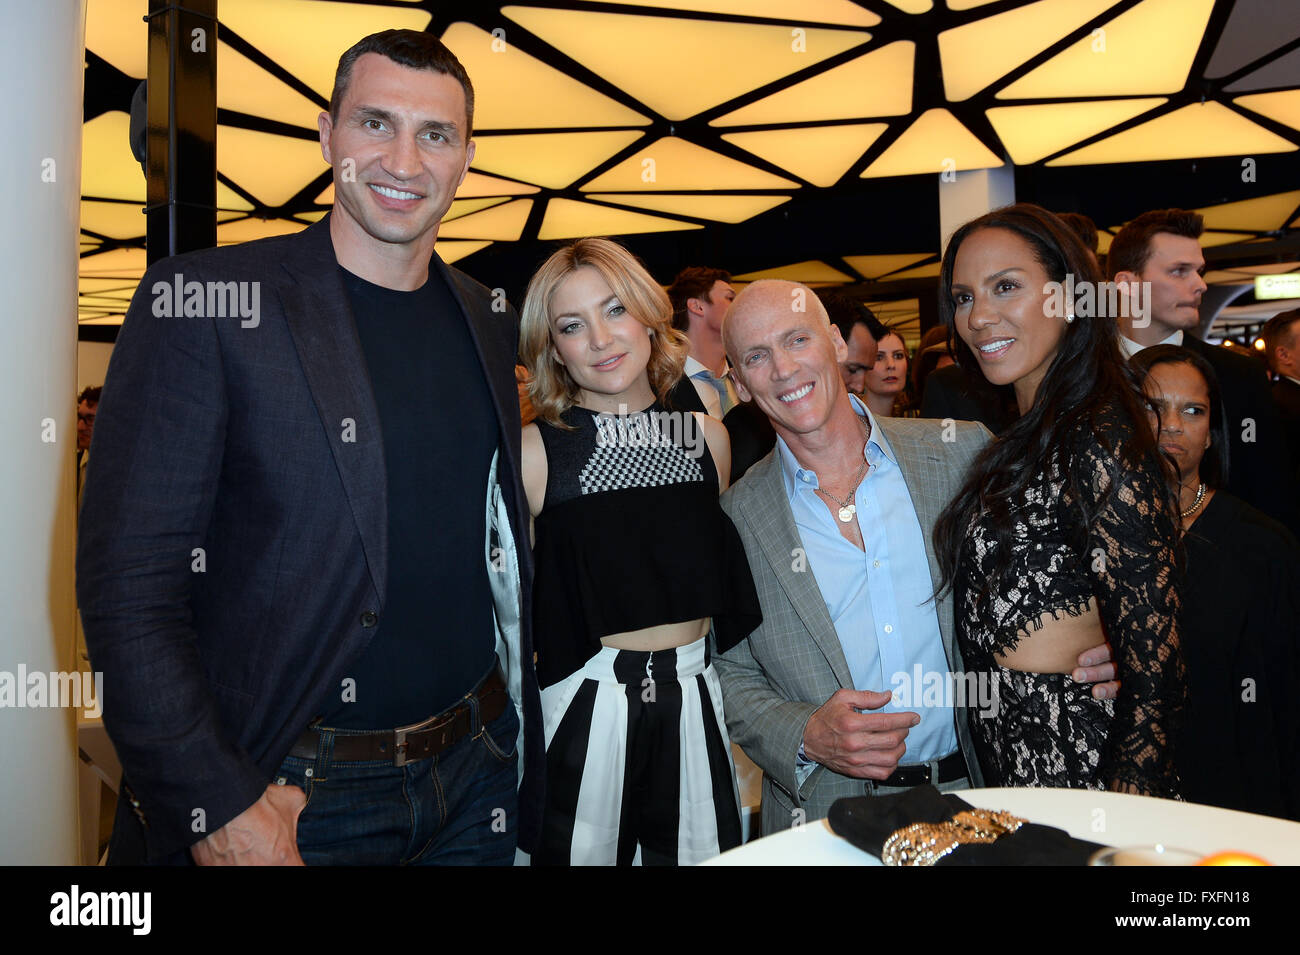 Berlin, Germany. 14th Apr, 2016. Boxing pro Wladimir Klitschko (L-R), US actress Kate Hudson, US fitness coach David Kirsch and German fitness coach Barbara Becker attend the opening party of the fitness studio 'World of Cyberobics' in Berlin, Germany, 14 April 2016. The fitness arena will open on 18 April 2016. Photo: Britta Pedersen/dpa/Alamy Live News Stock Photo